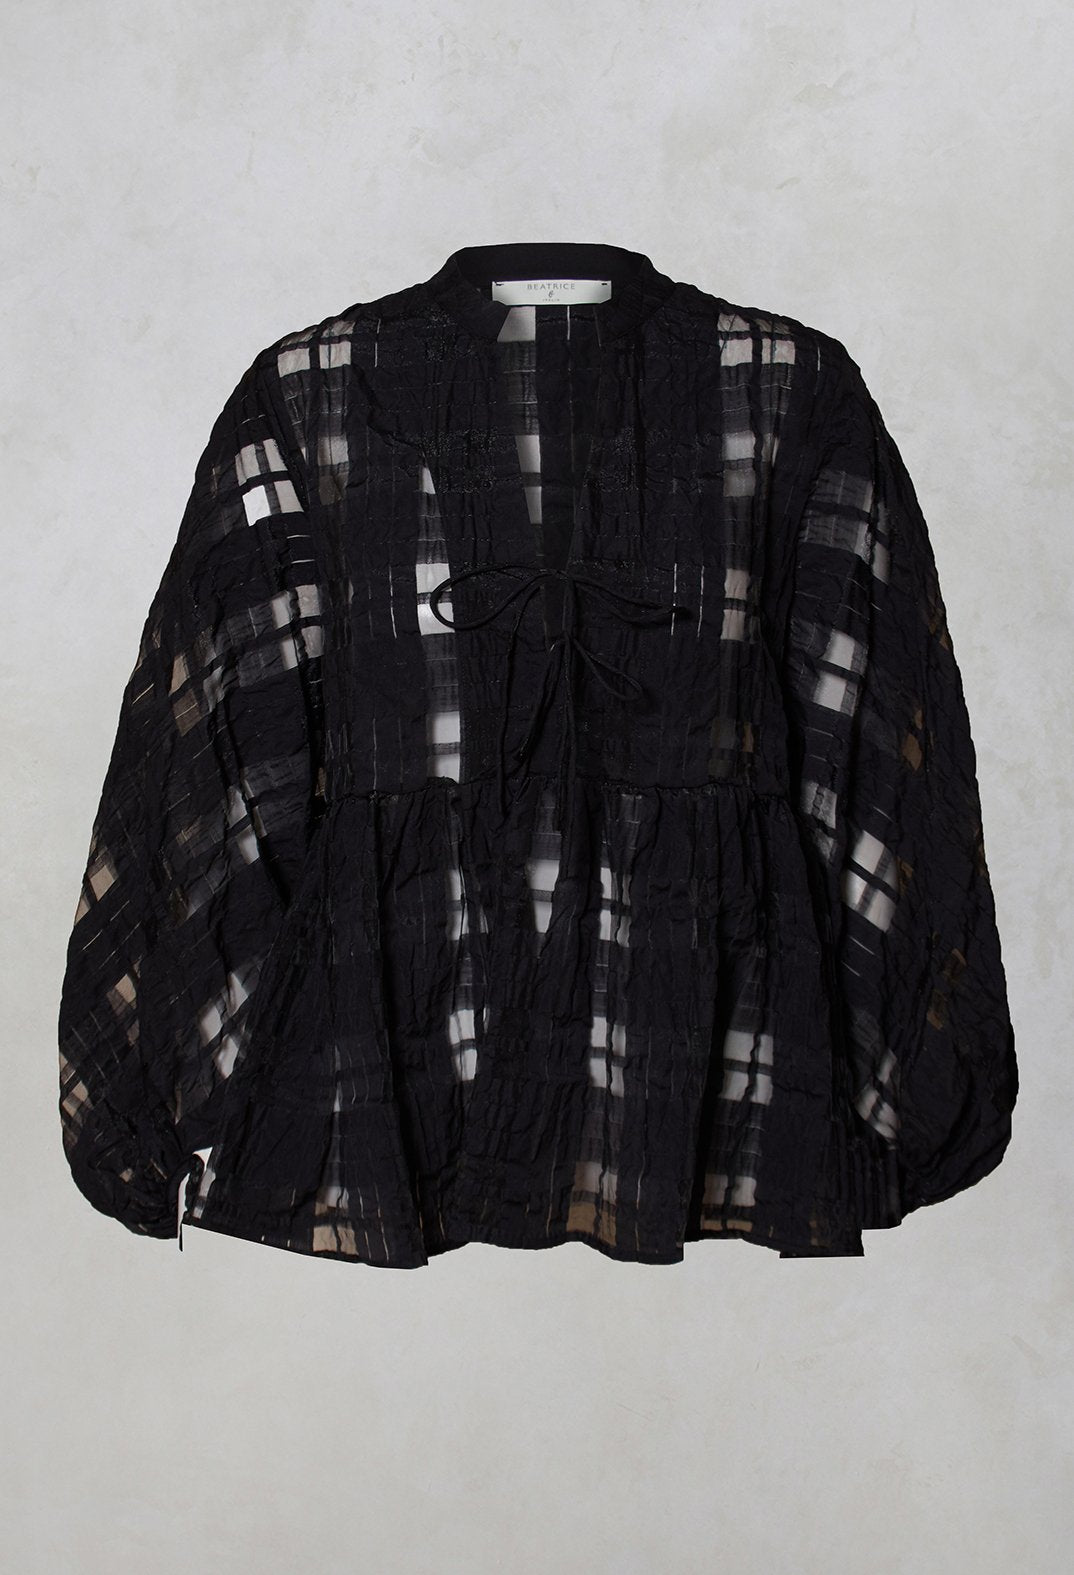 jacquard check mesh blouse in black with tie detailing